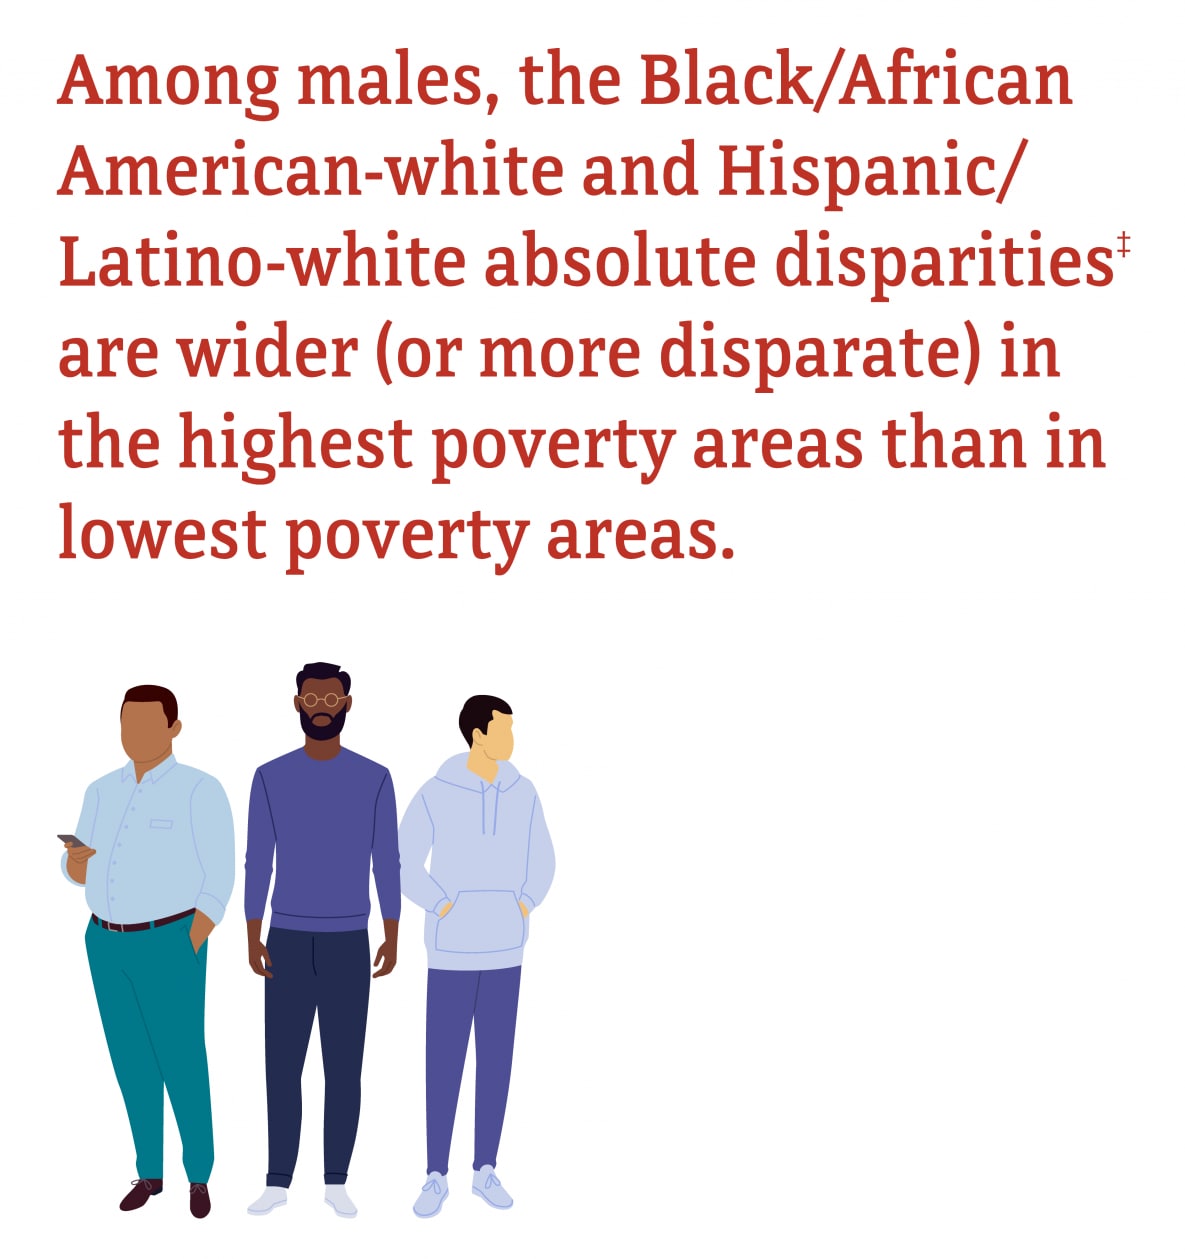 Figure 13: Among males residing in census tracts with the lowest poverty, HIV diagnosis rates in 2018 among Blacks/African Americans (45.9) and Hispanics/Latinos (26.6) were 7.6 times and 4.4 times, respectively, as high as the rate for whites (6.0). The Black/African American-white and Hispanic/Latino-white relative disparities increased by 45% and 62%, respectively, as percentages of poverty decreased. Whereas, the Black/African American-white and Hispanic/Latino-white absolute disparities were wider (or more disparate) in the highest poverty areas than in lowest poverty areas.